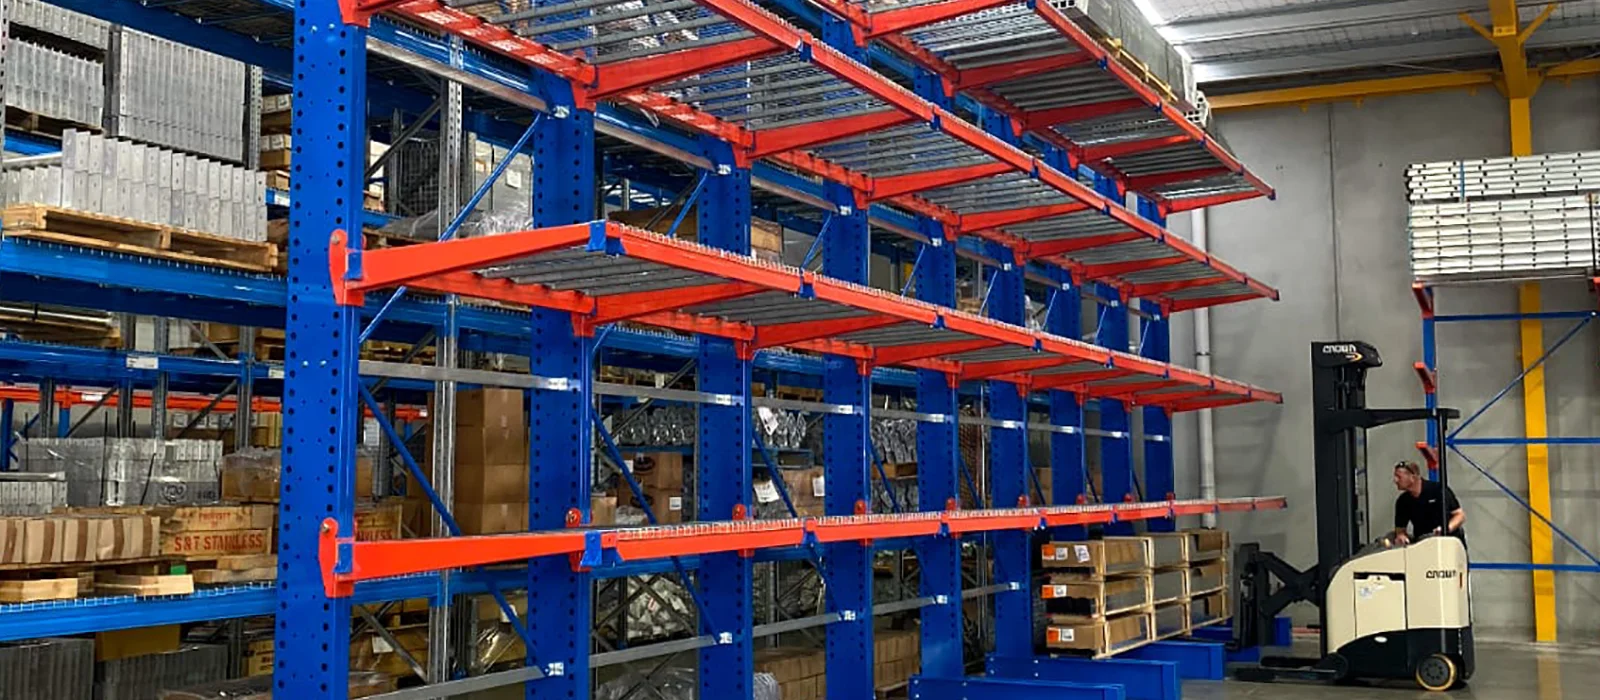 Intaks Heavy Duty Cantilever Racking with Support Bars and Mesh Decks